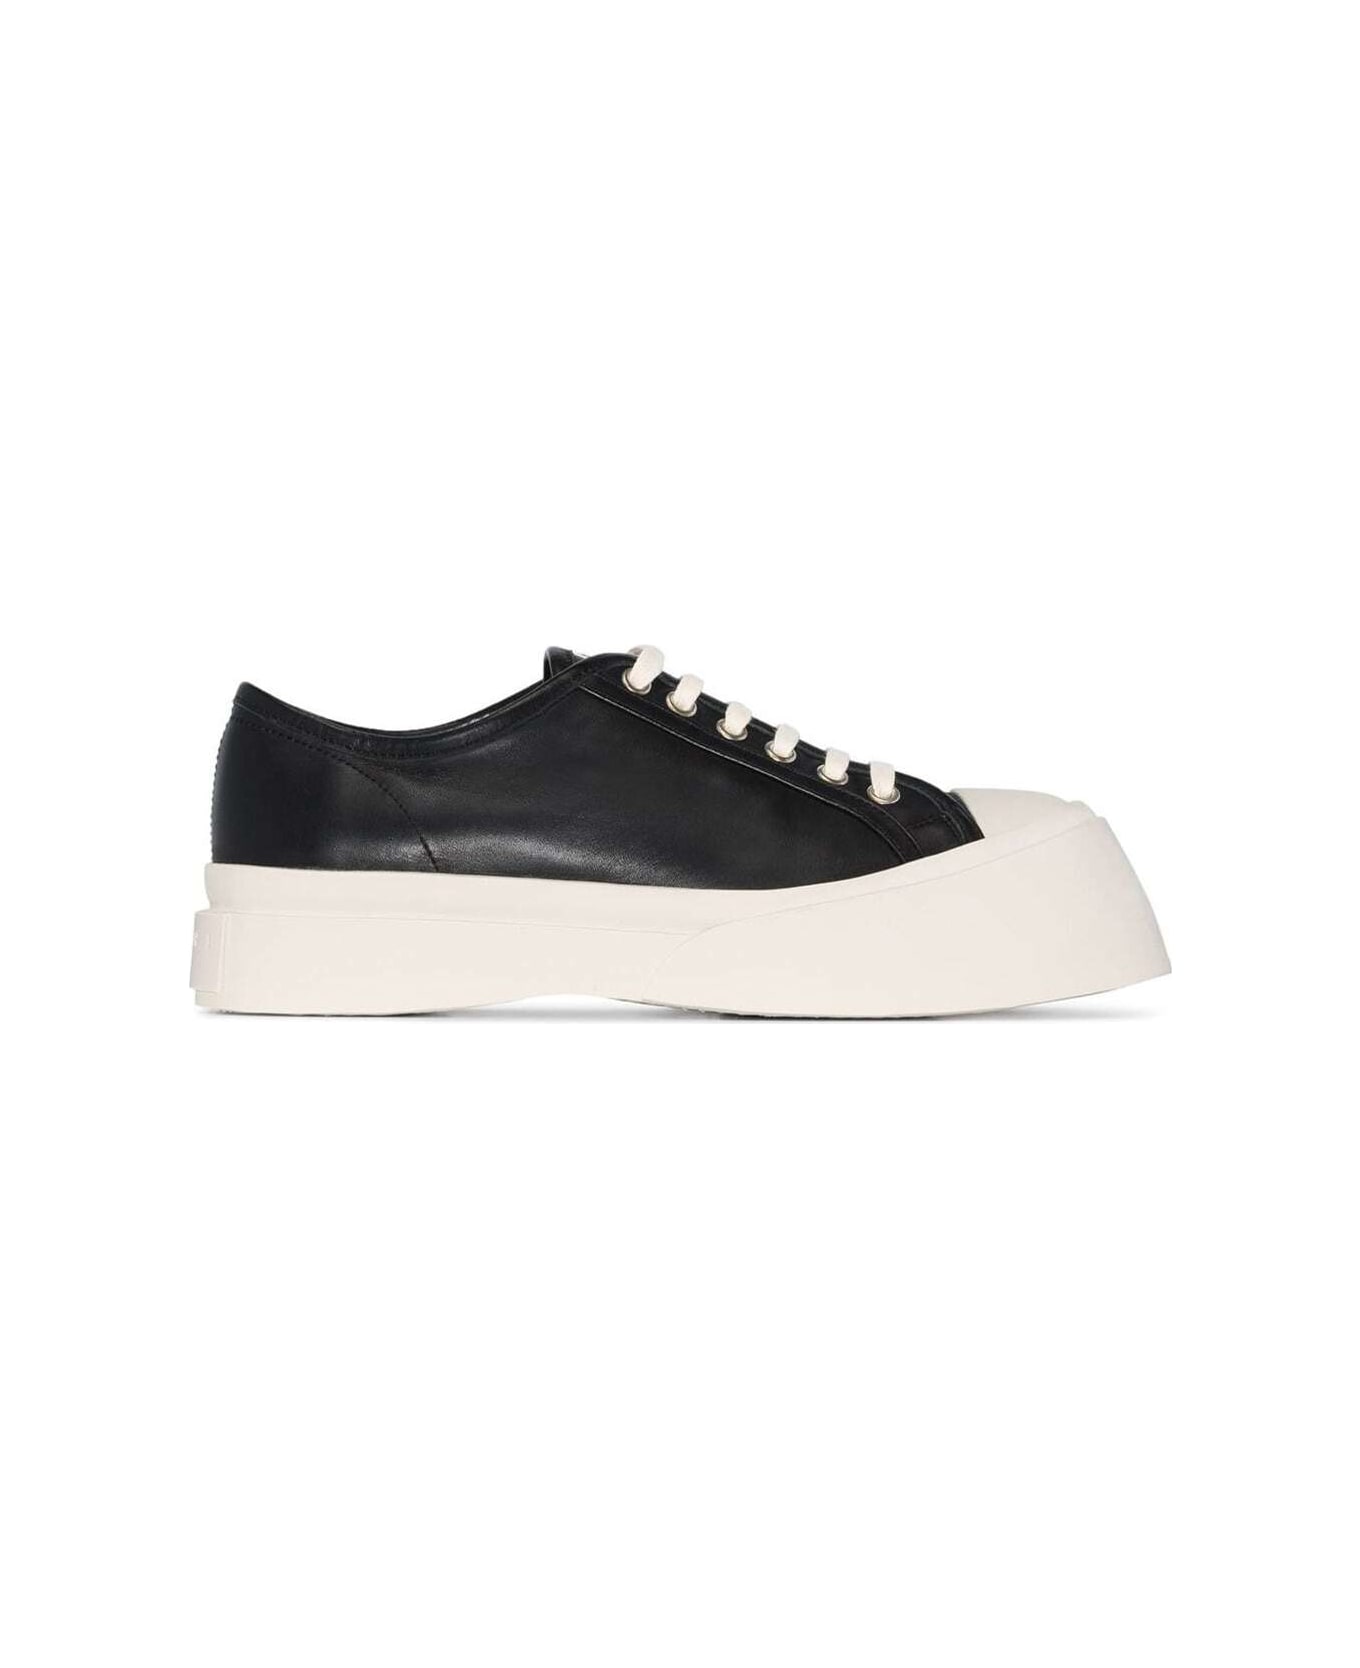 Marni Black Sneakers With Oversized Platform In Leather Woman - Black ウェッジシューズ